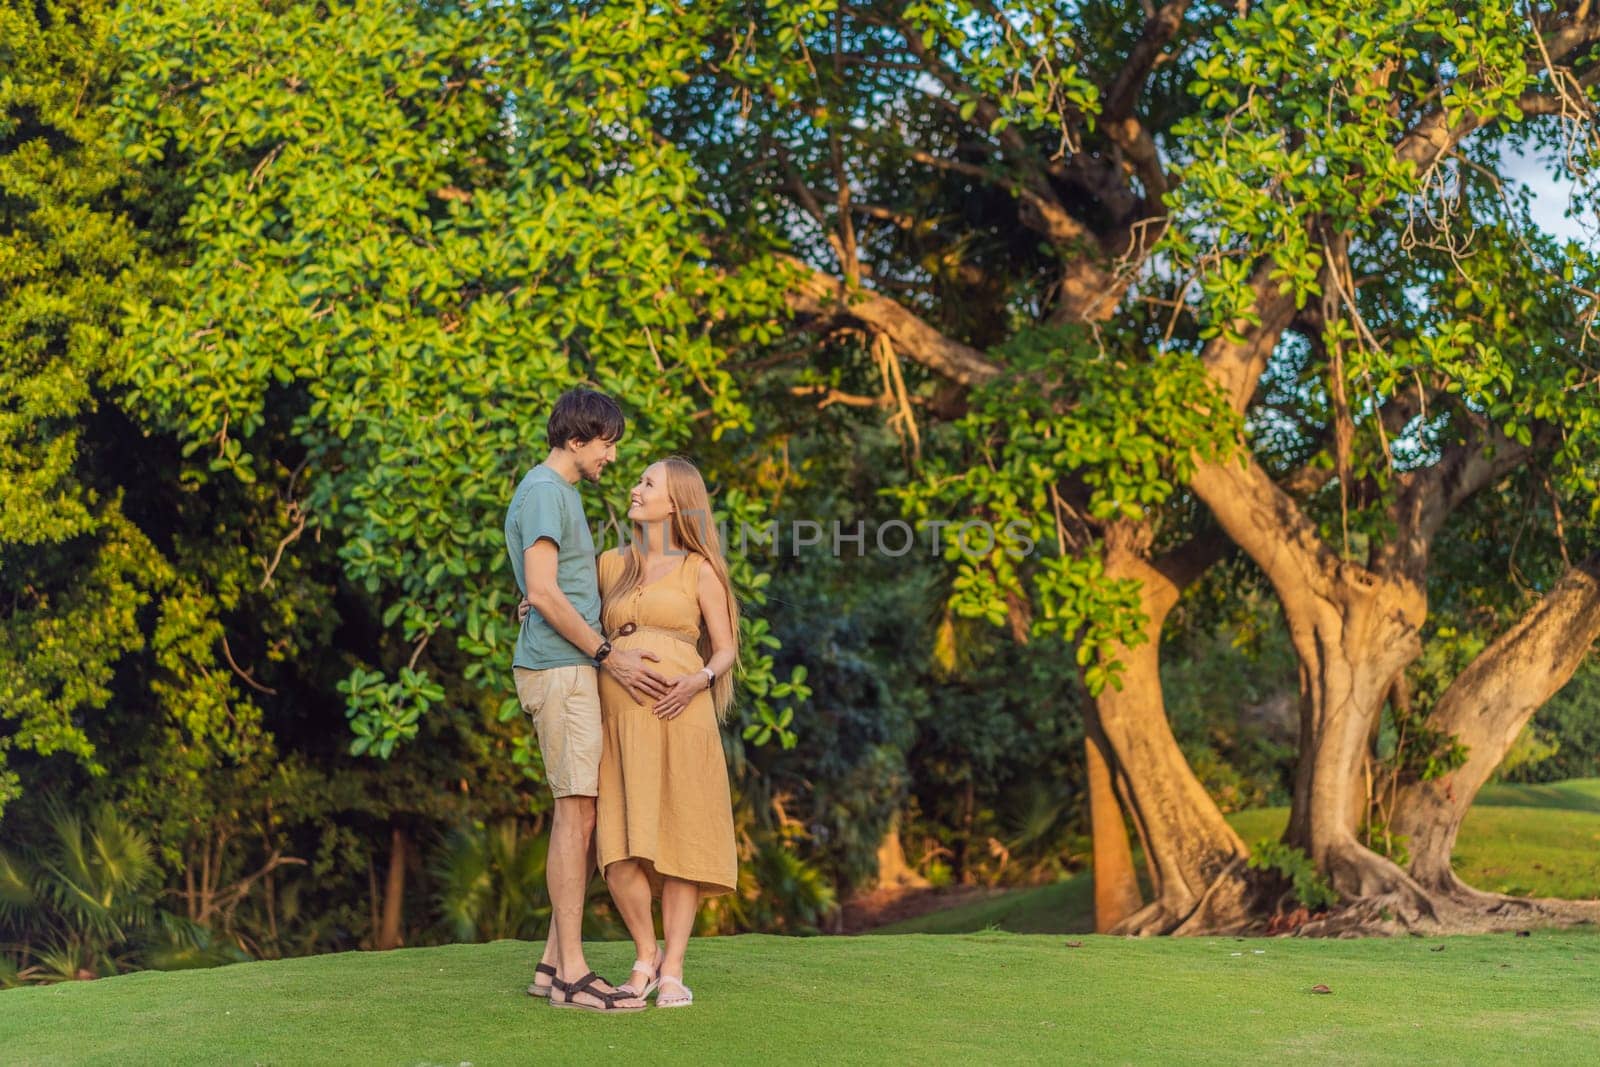 A blissful moment as a pregnant woman and her husband spend quality time together outdoors, savoring each other's company and enjoying the serenity of nature by galitskaya